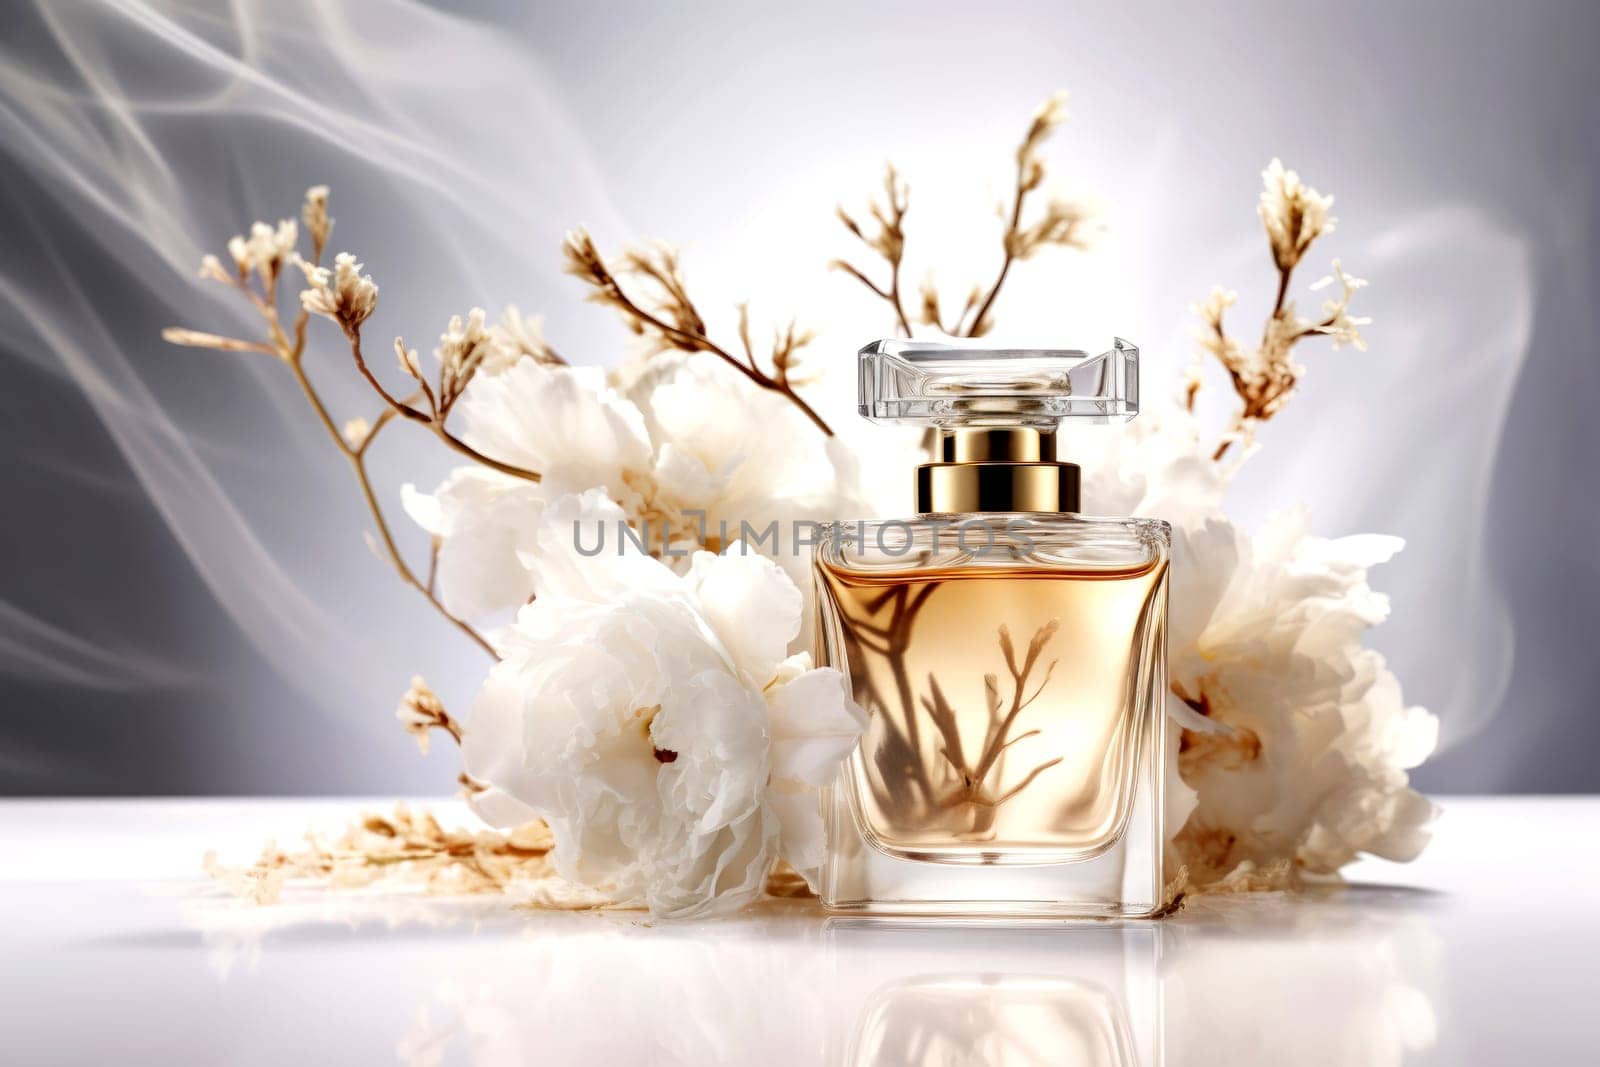 Perfume bottle surrounded by delicate white flowers and soft smoke